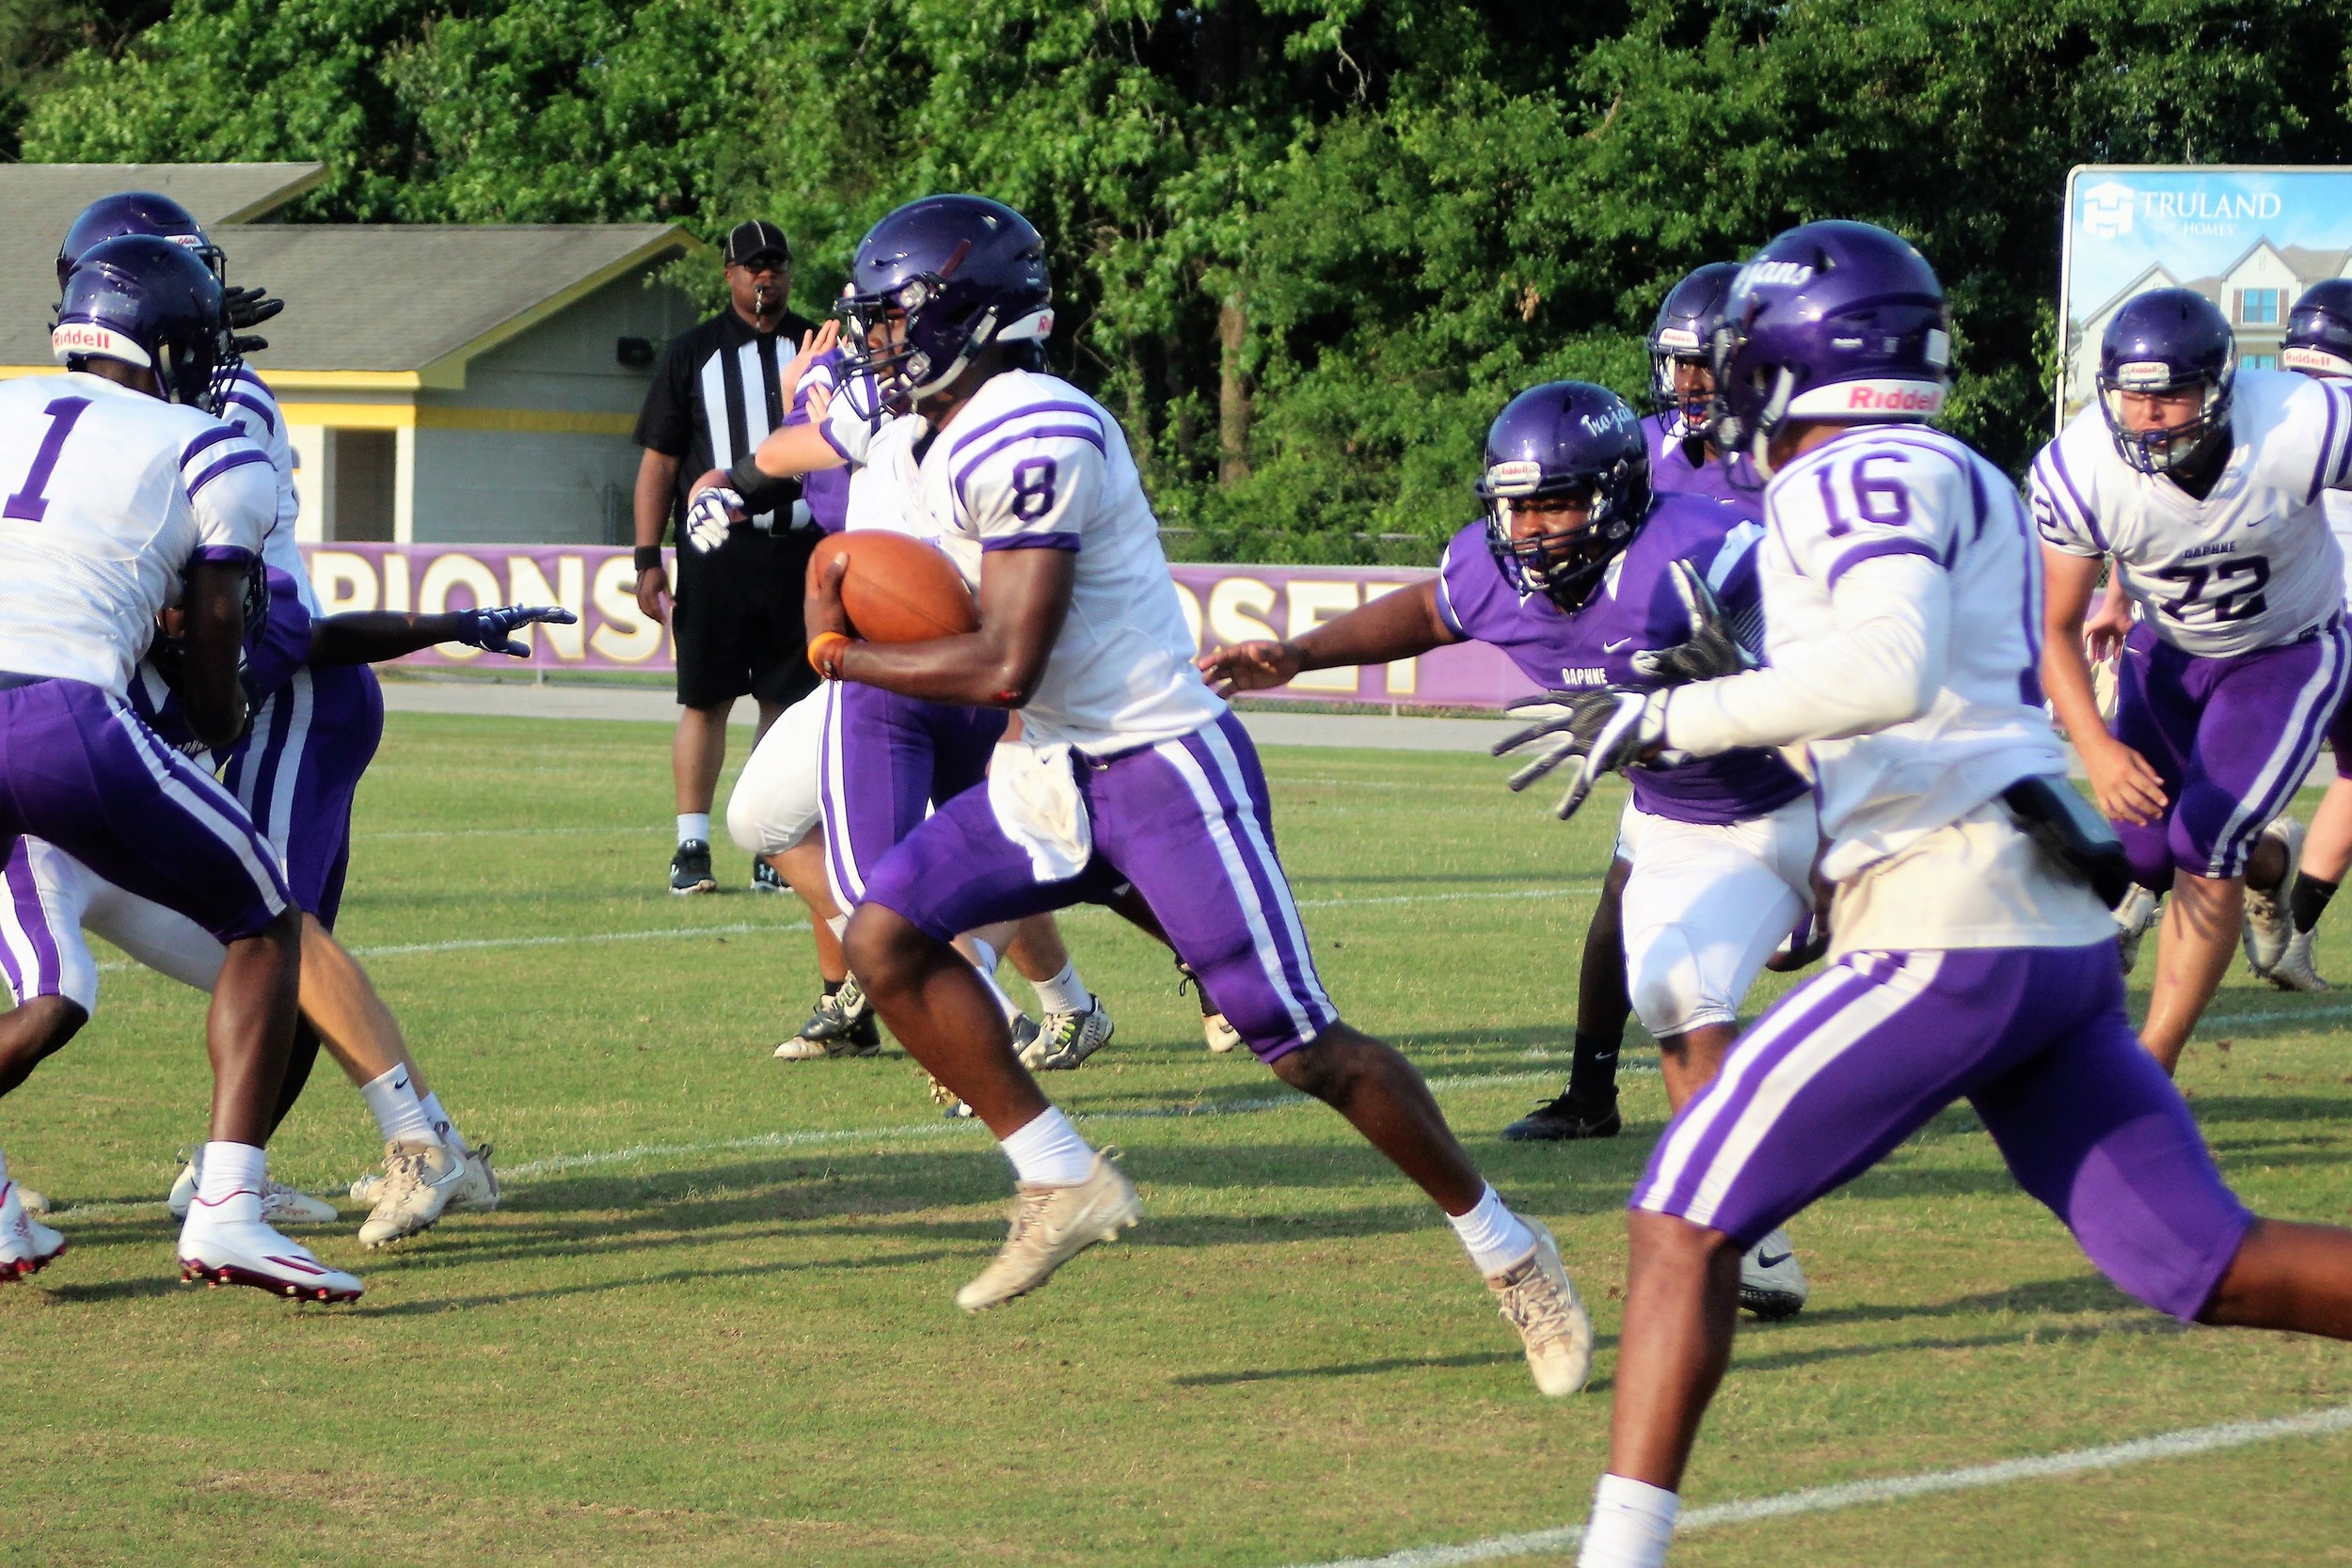 Daphne quarterback Trent Battle picks up yards on the ground during the Purple and Gold Spring Game at Jubilee Stadium May 18, 2018. Battle, now a member of the TCU Horned Frogs, will play for the national championship Monday night at SoFi Stadium.